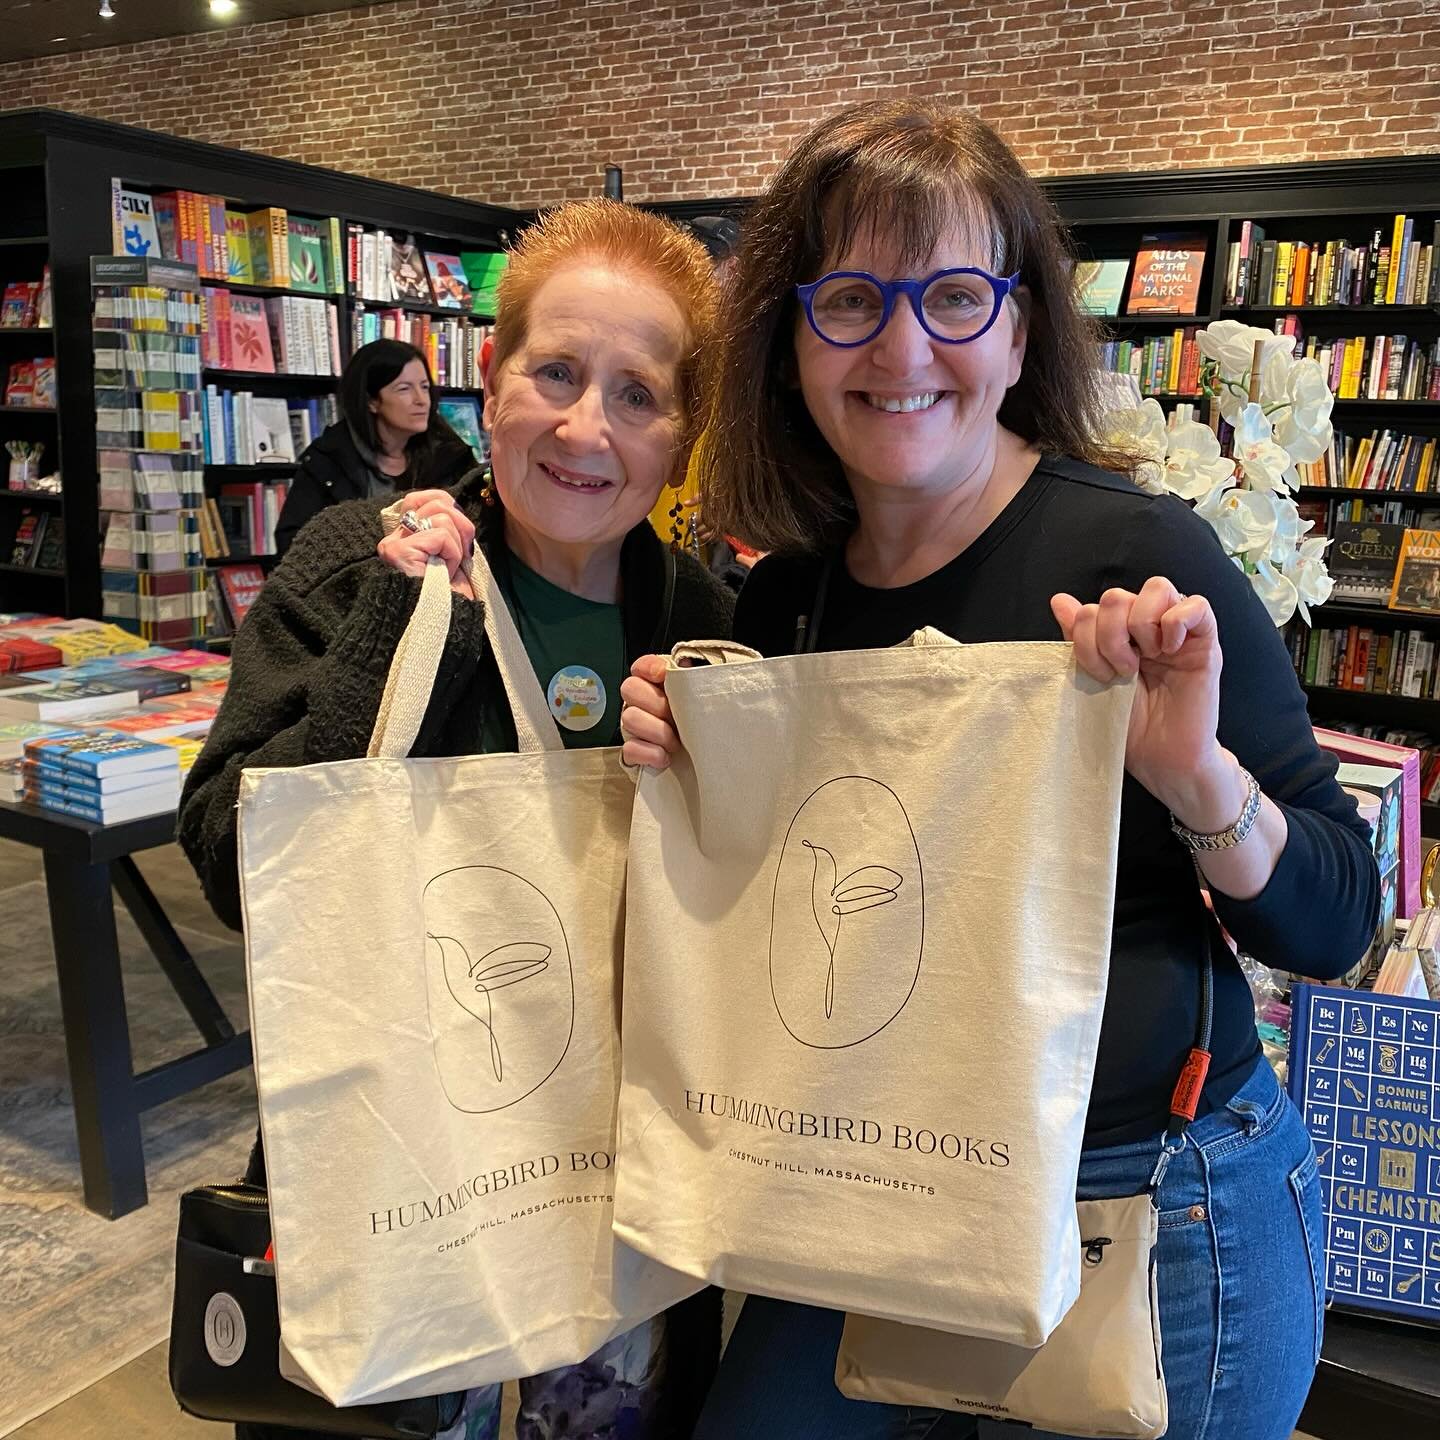 We had a great time celebrating #IndependentBookstoreDay with you! There were plenty of treats, and many booklovers completed our scavenger hunt. Thank you for supporting @hummingbirdbookstore! 📚❤️

#indiebookstoreday #shoplocal #womanowned #communi